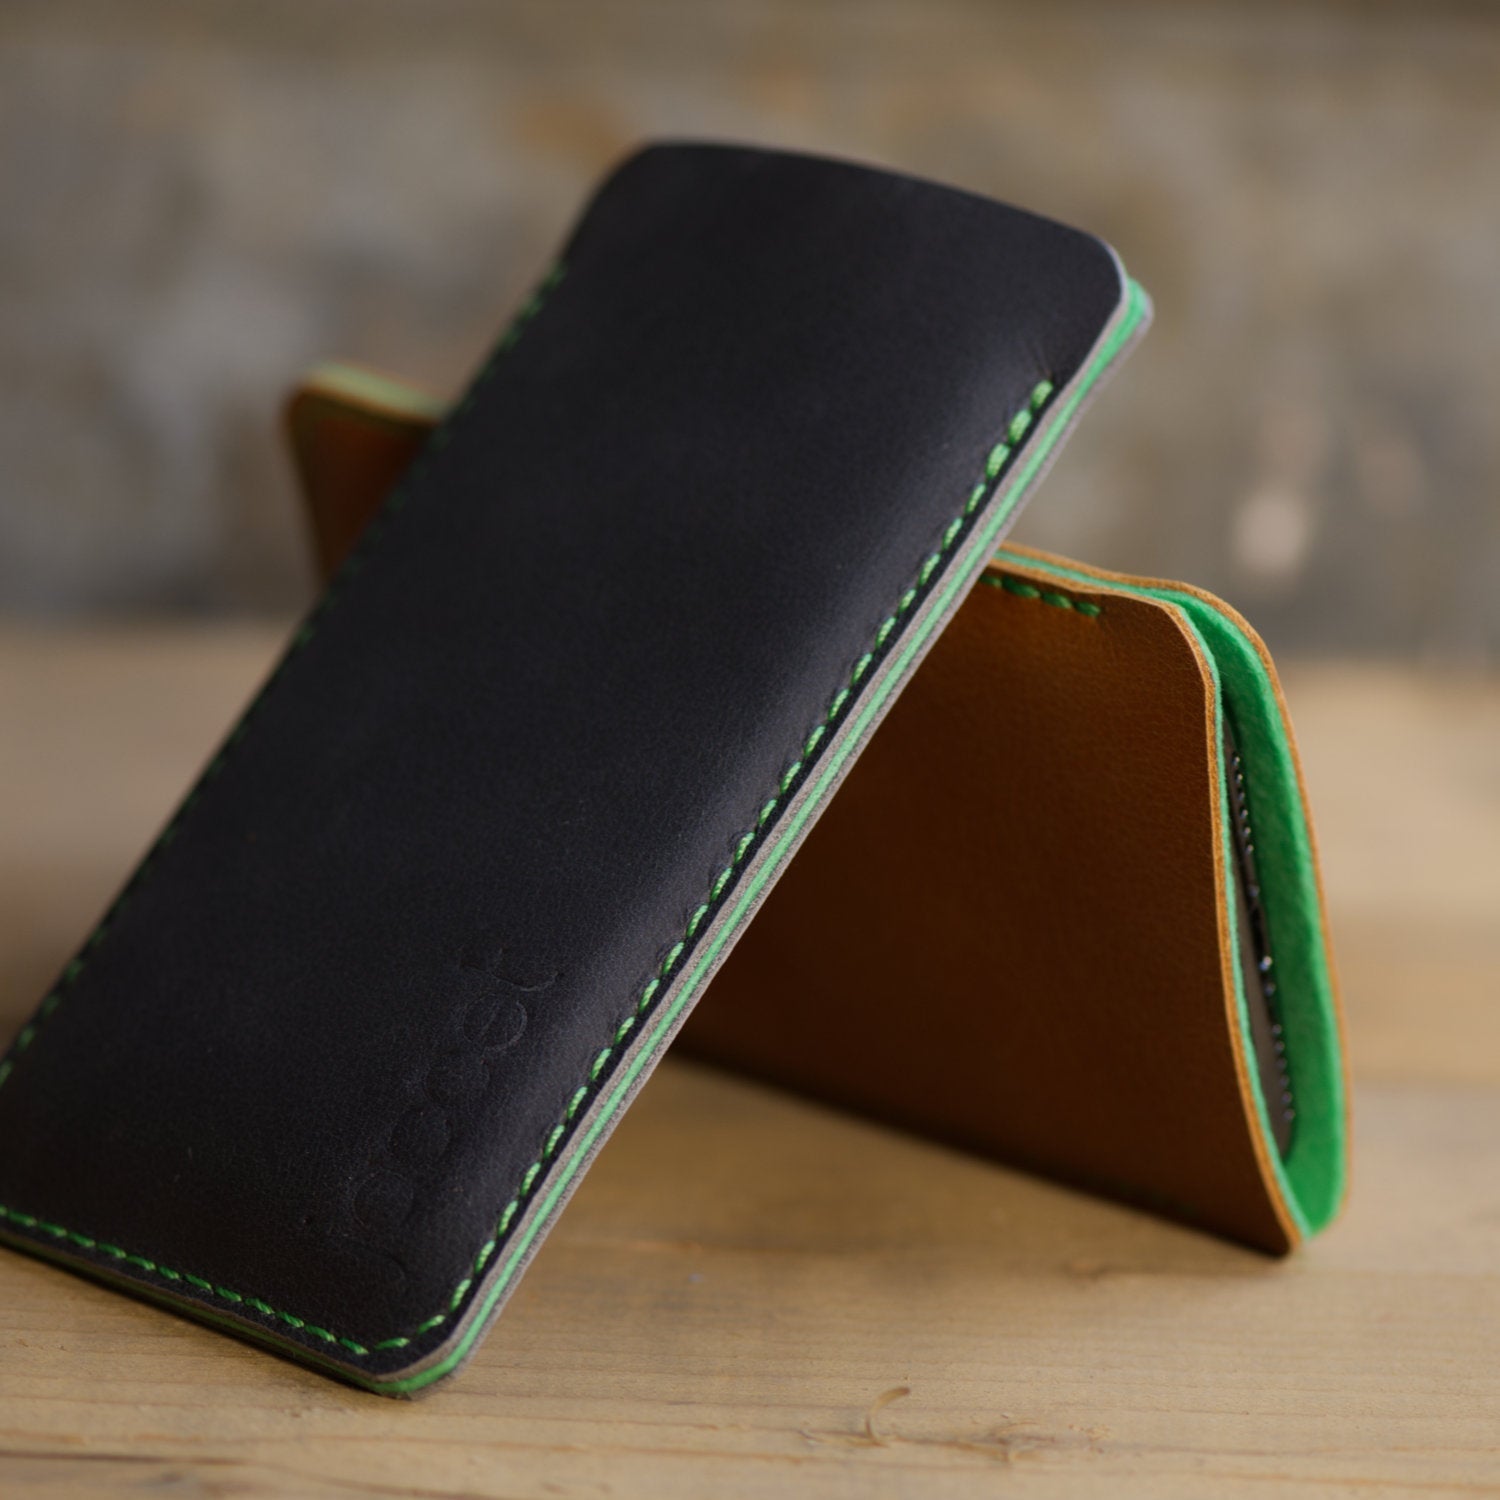 JACCET leather Sony Xperia sleeve - anthracite/black leather with green wool felt. 100% Handmade